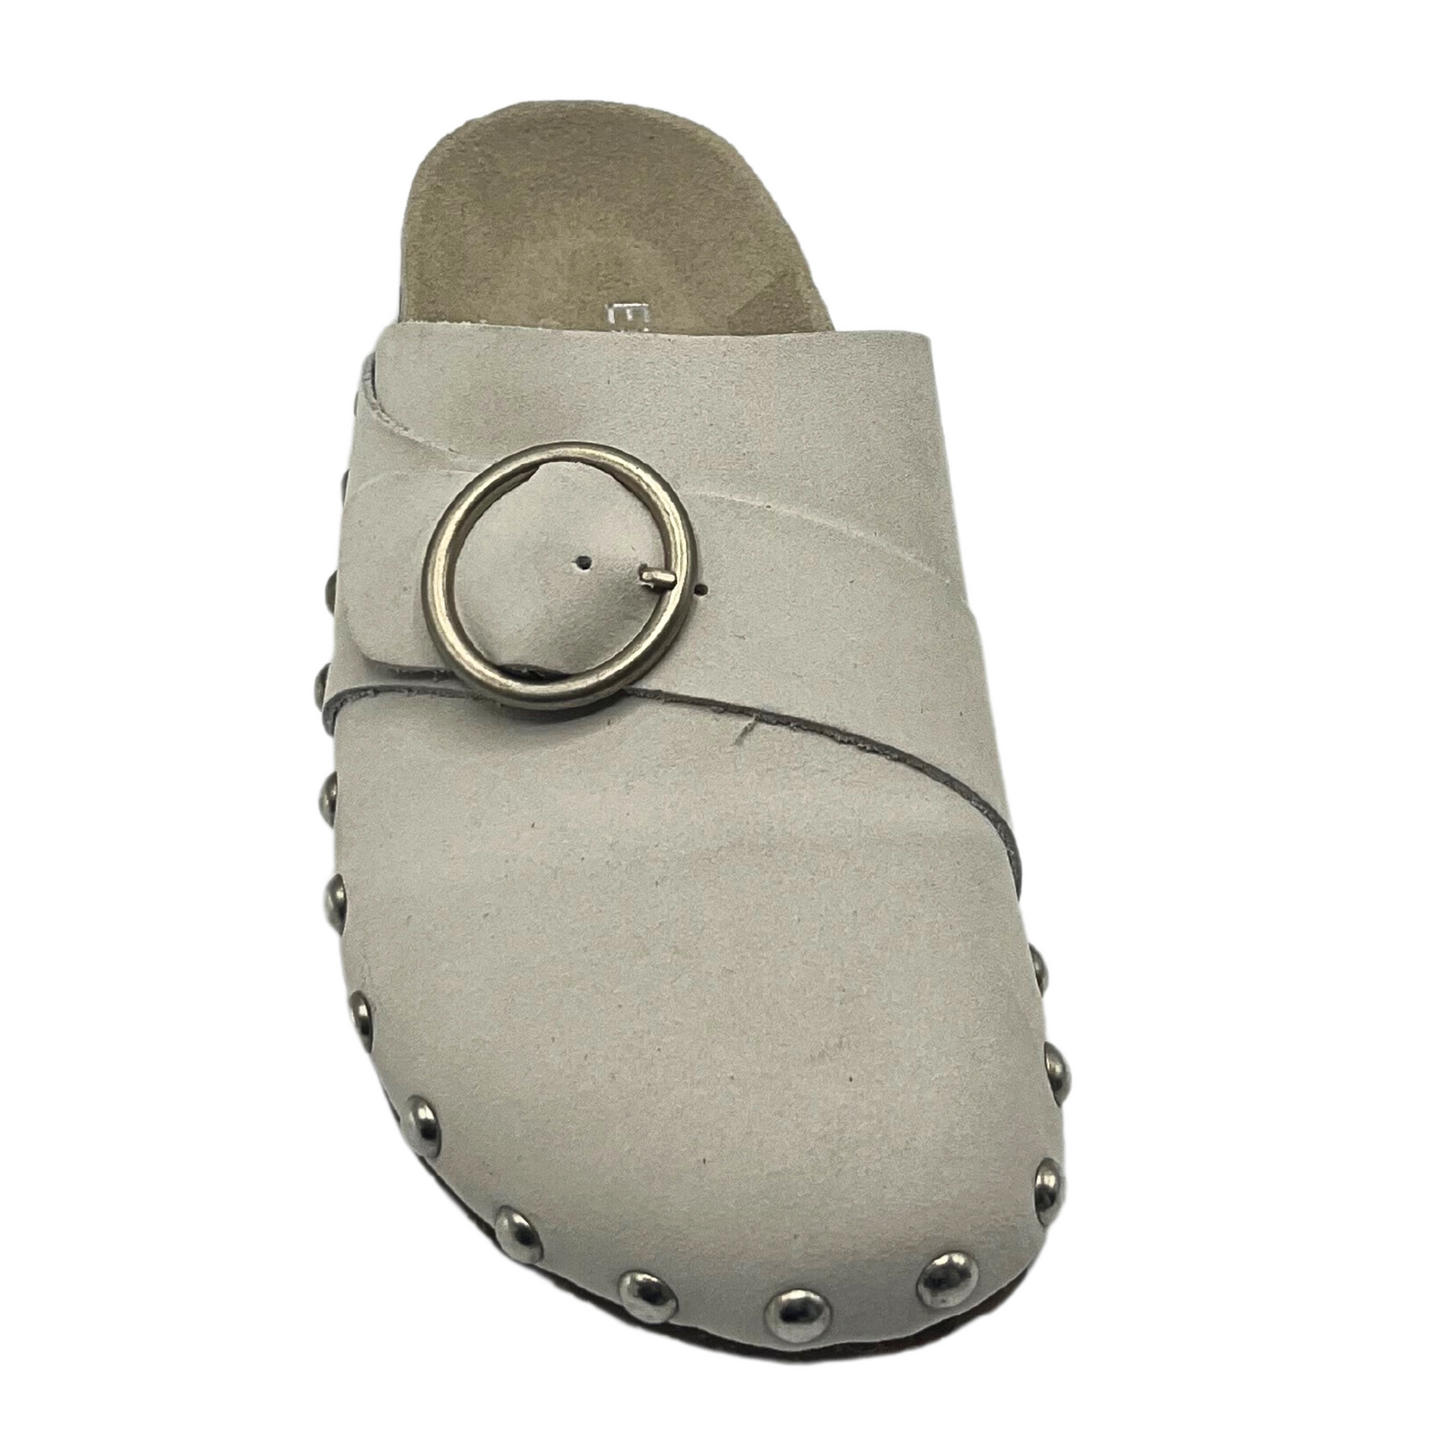 Top down view of a flat mule done in a neutral cocnut color.  Closed toe with studded details around the sole.  Buckle adjustment at top strap